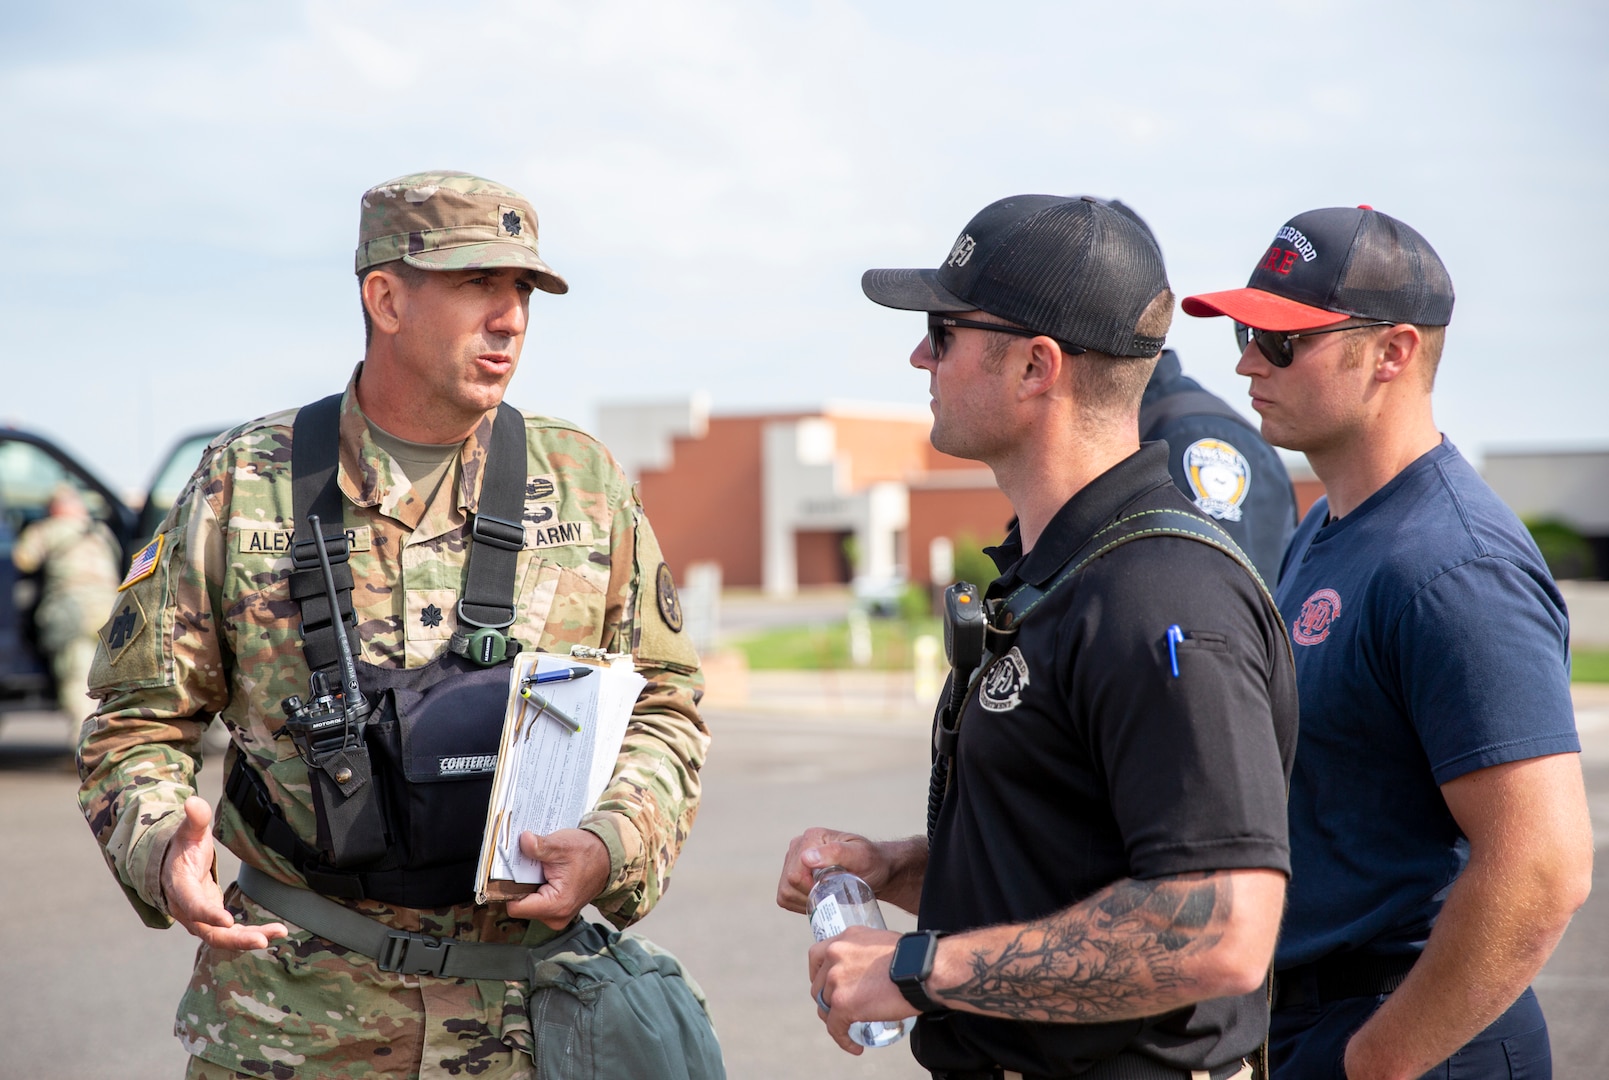 Oklahoma Guardsman, Lt. Col. Barrett Alexander (left), commander of the 63rd Civil Support Team (CST) collaborates with local first responders, including Capt. Thomas Elkouri (right), incident commander with the Weatherford Fire Department during a full-scale exercise held in Custer and Washita County and the City of Weatherford, May 23-25, 2023. The comprehensive exercise provided an invaluable opportunity for all participants to enhance their coordination, communication, and response capabilities. By training together, the Oklahoma National Guard's 63rd Civil Support Team, local first responders, and other agencies involved can help ensure effective and efficient collaboration in the face of emergencies. 

The training was designed and controlled by US Army North in order to assess the capabilities of both the first responders as well as the CST, including helping reinforce tactics and relationships between participating agencies for any broad spectrum of potential threats. (Oklahoma National Guard photo by Leanna Maschino)